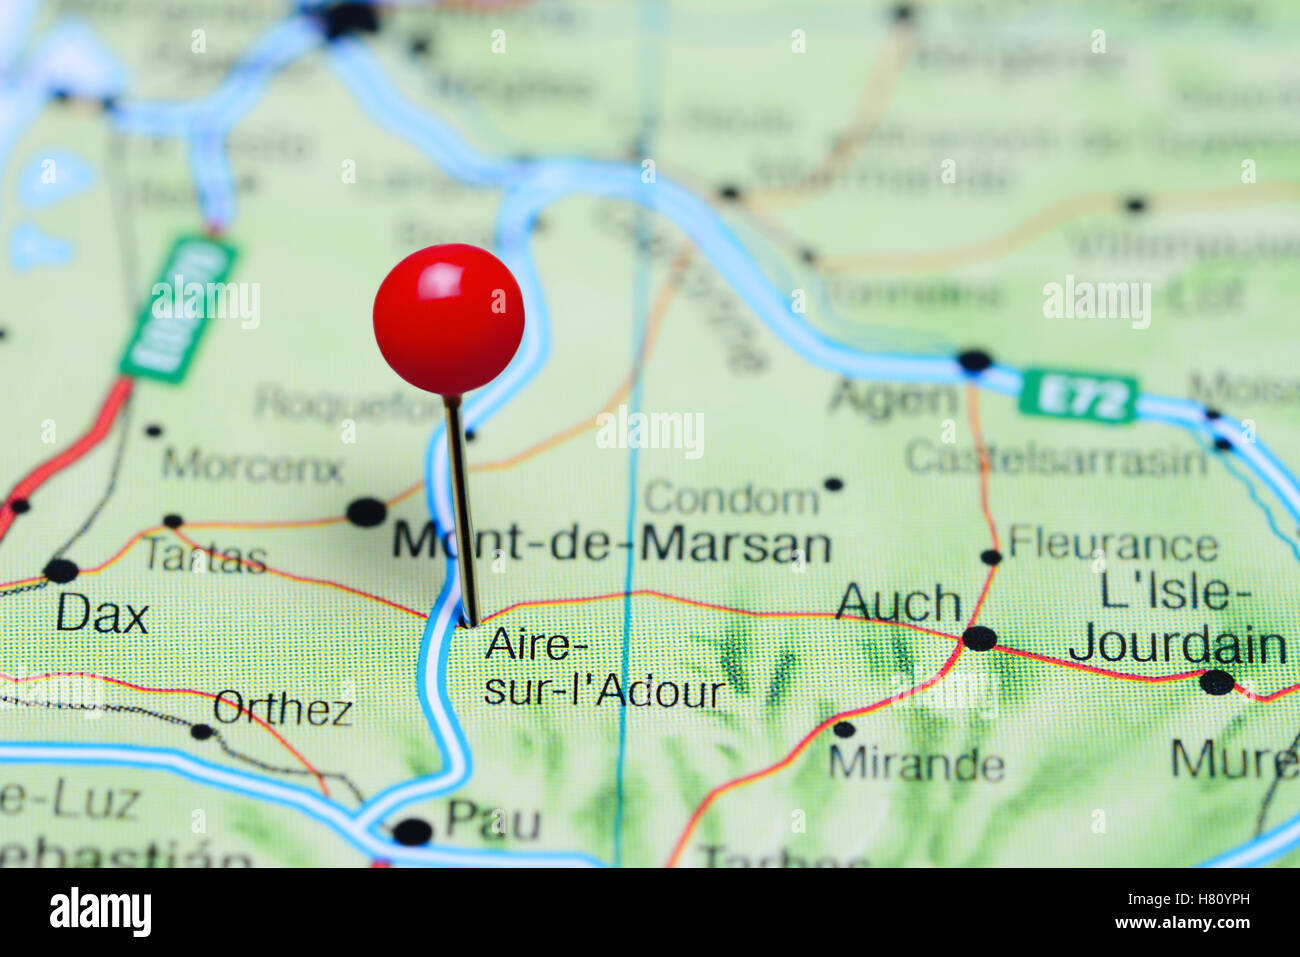 Aire-sur-Adour pinned on a map of France Stock Photo